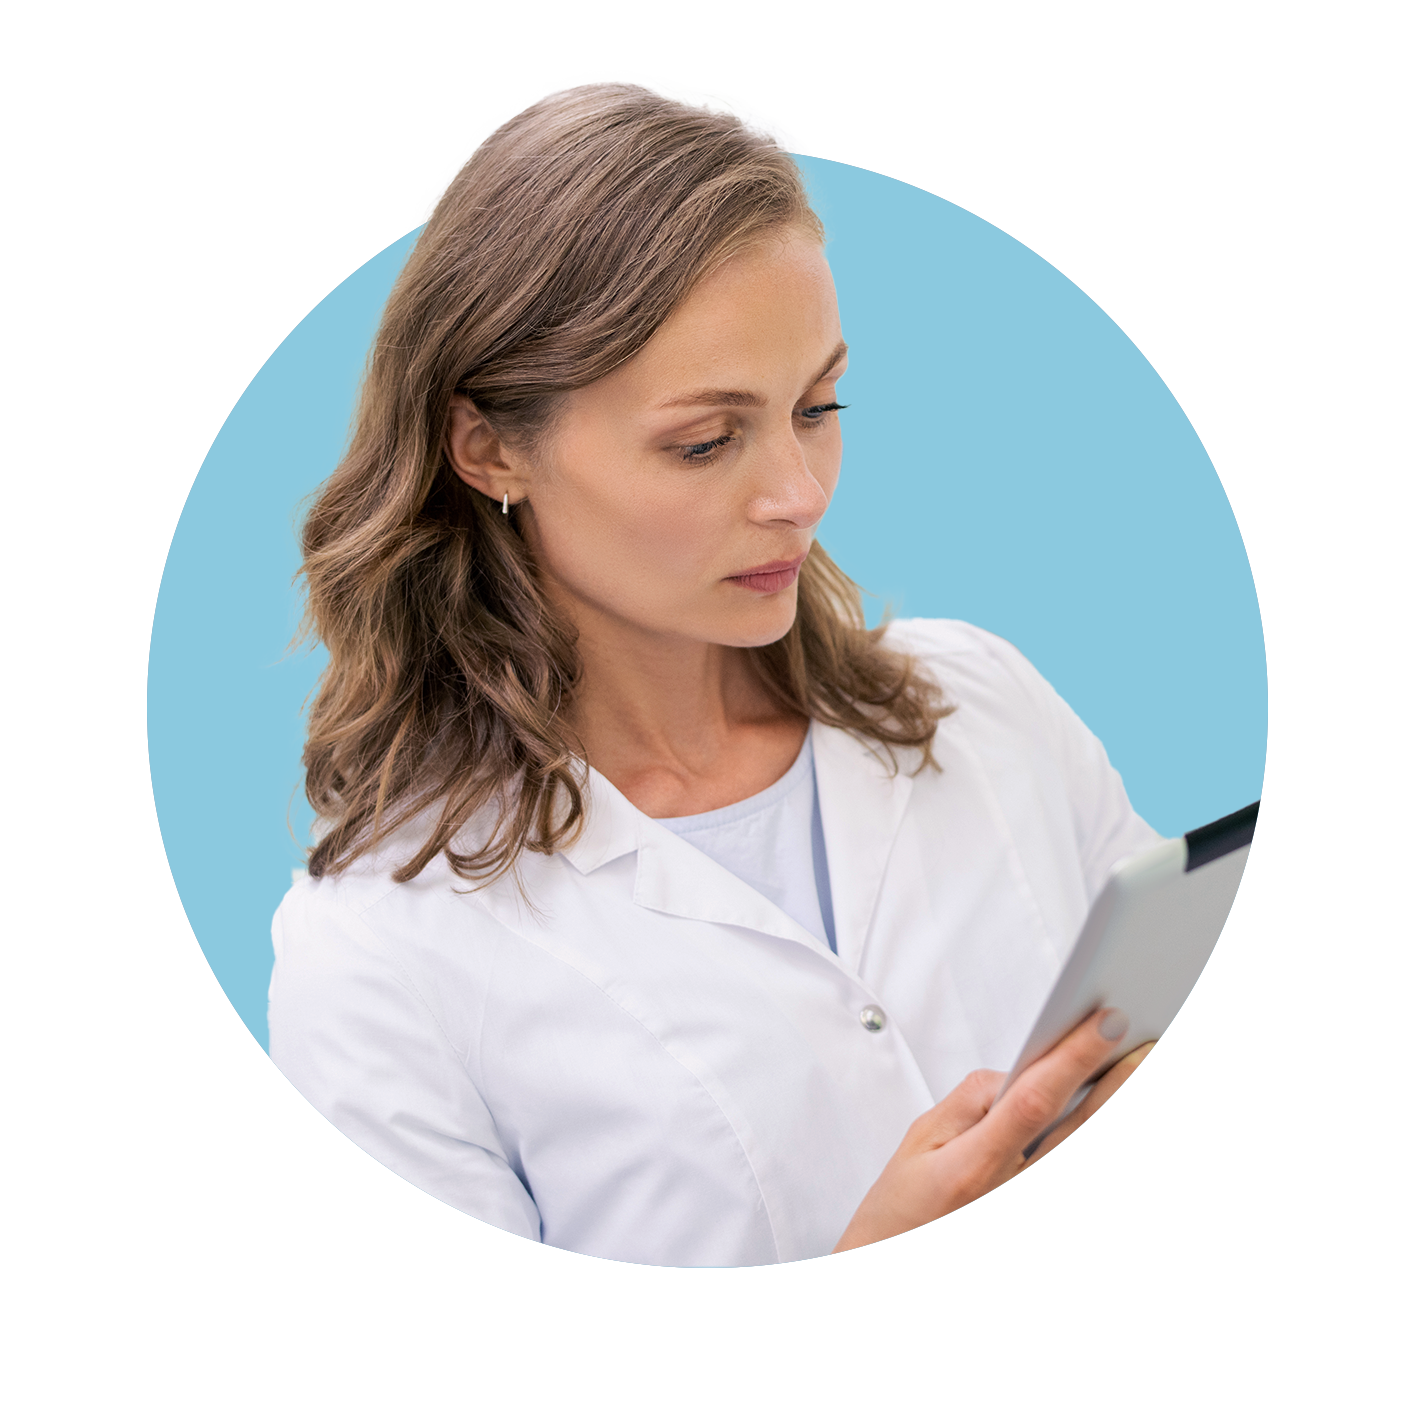 Nurse holding and looking at information on her tablet